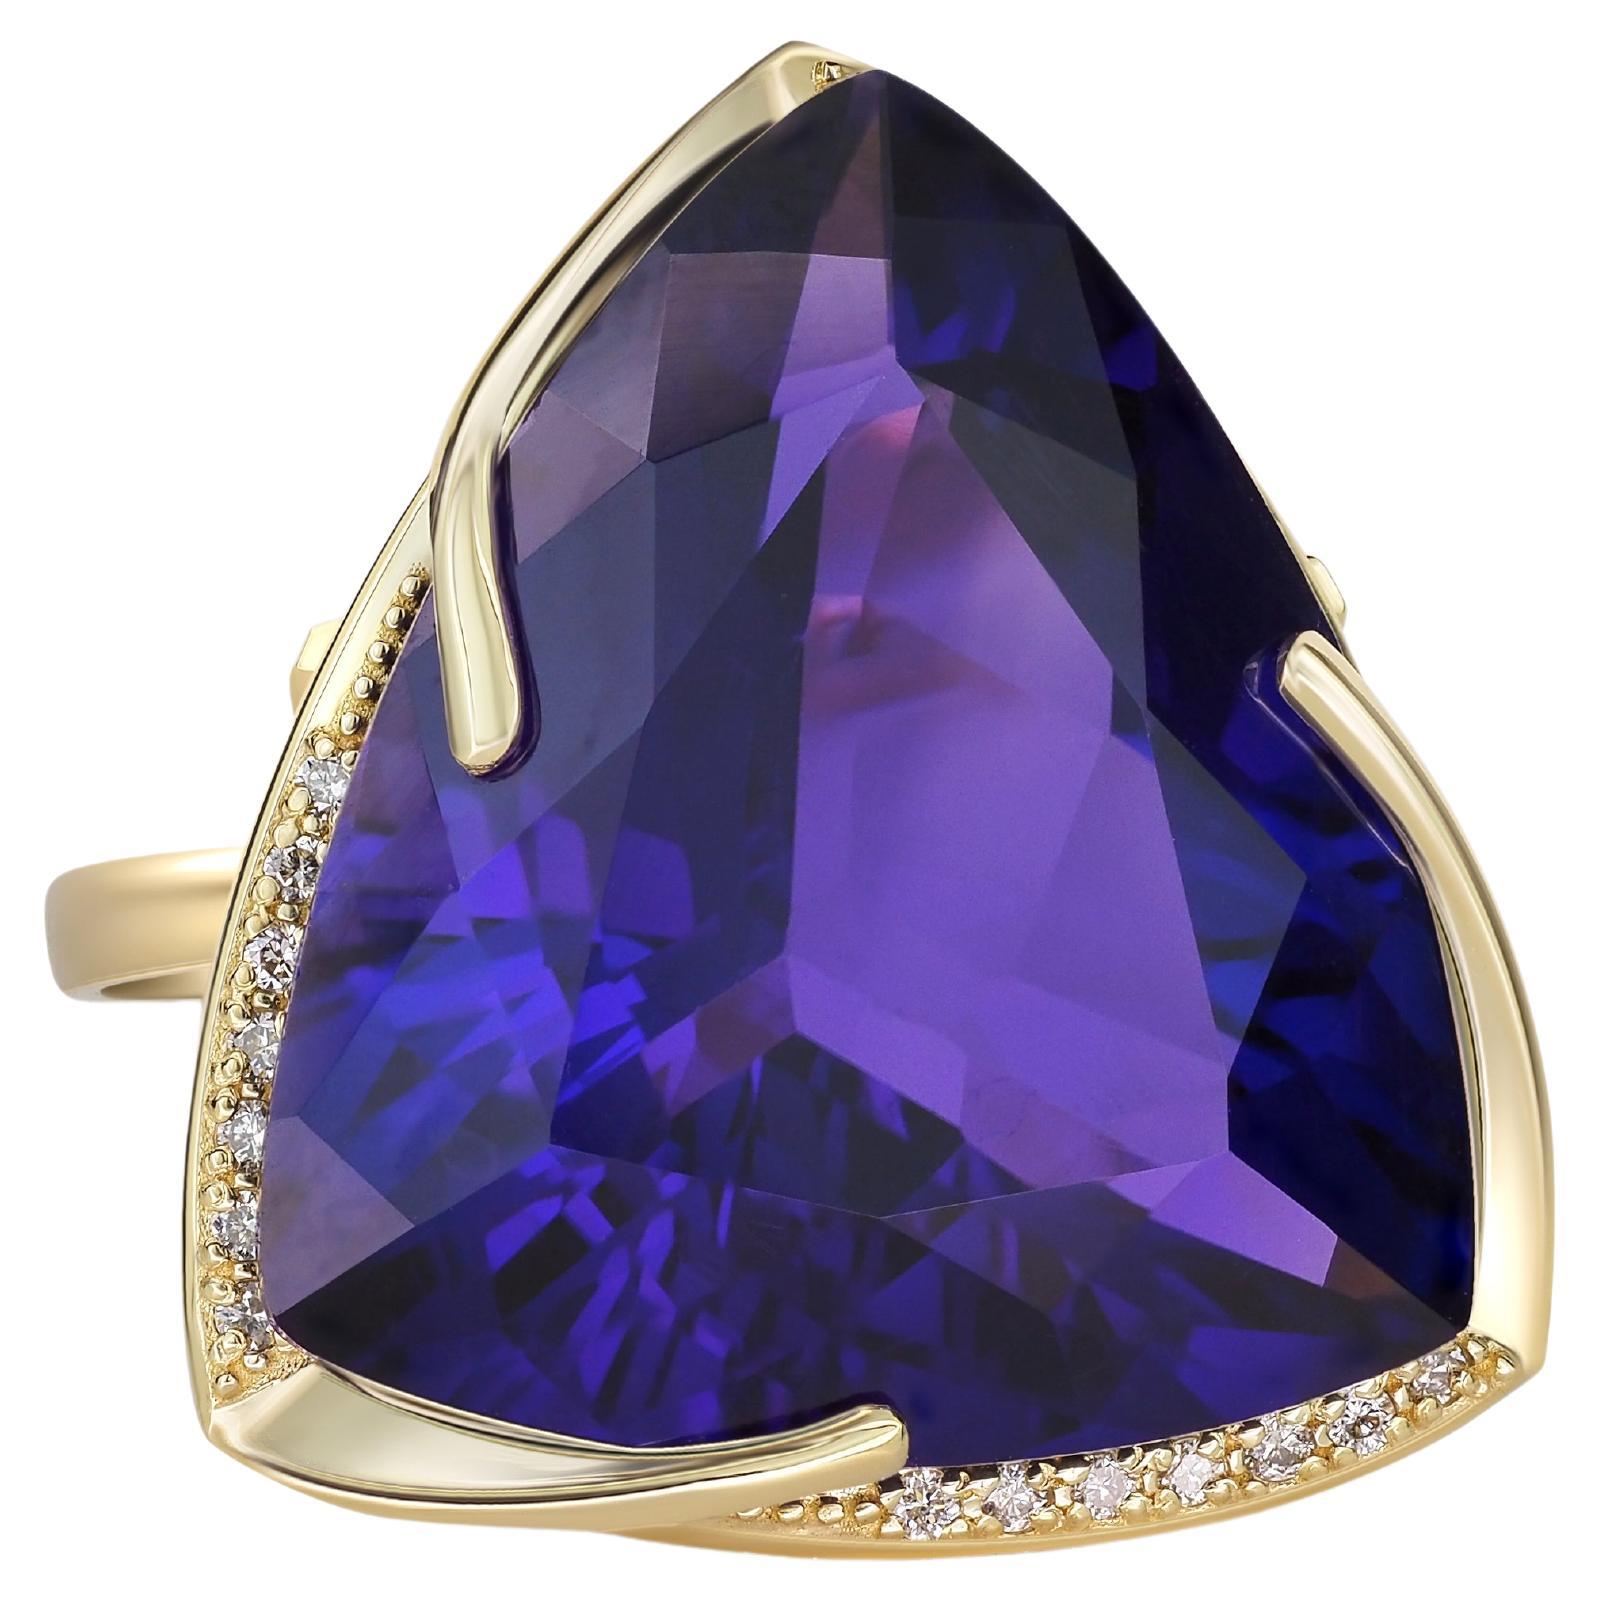 14 Karat Gold Ring with Amethyst and Diamonds, Amethyst Cocktail Ring